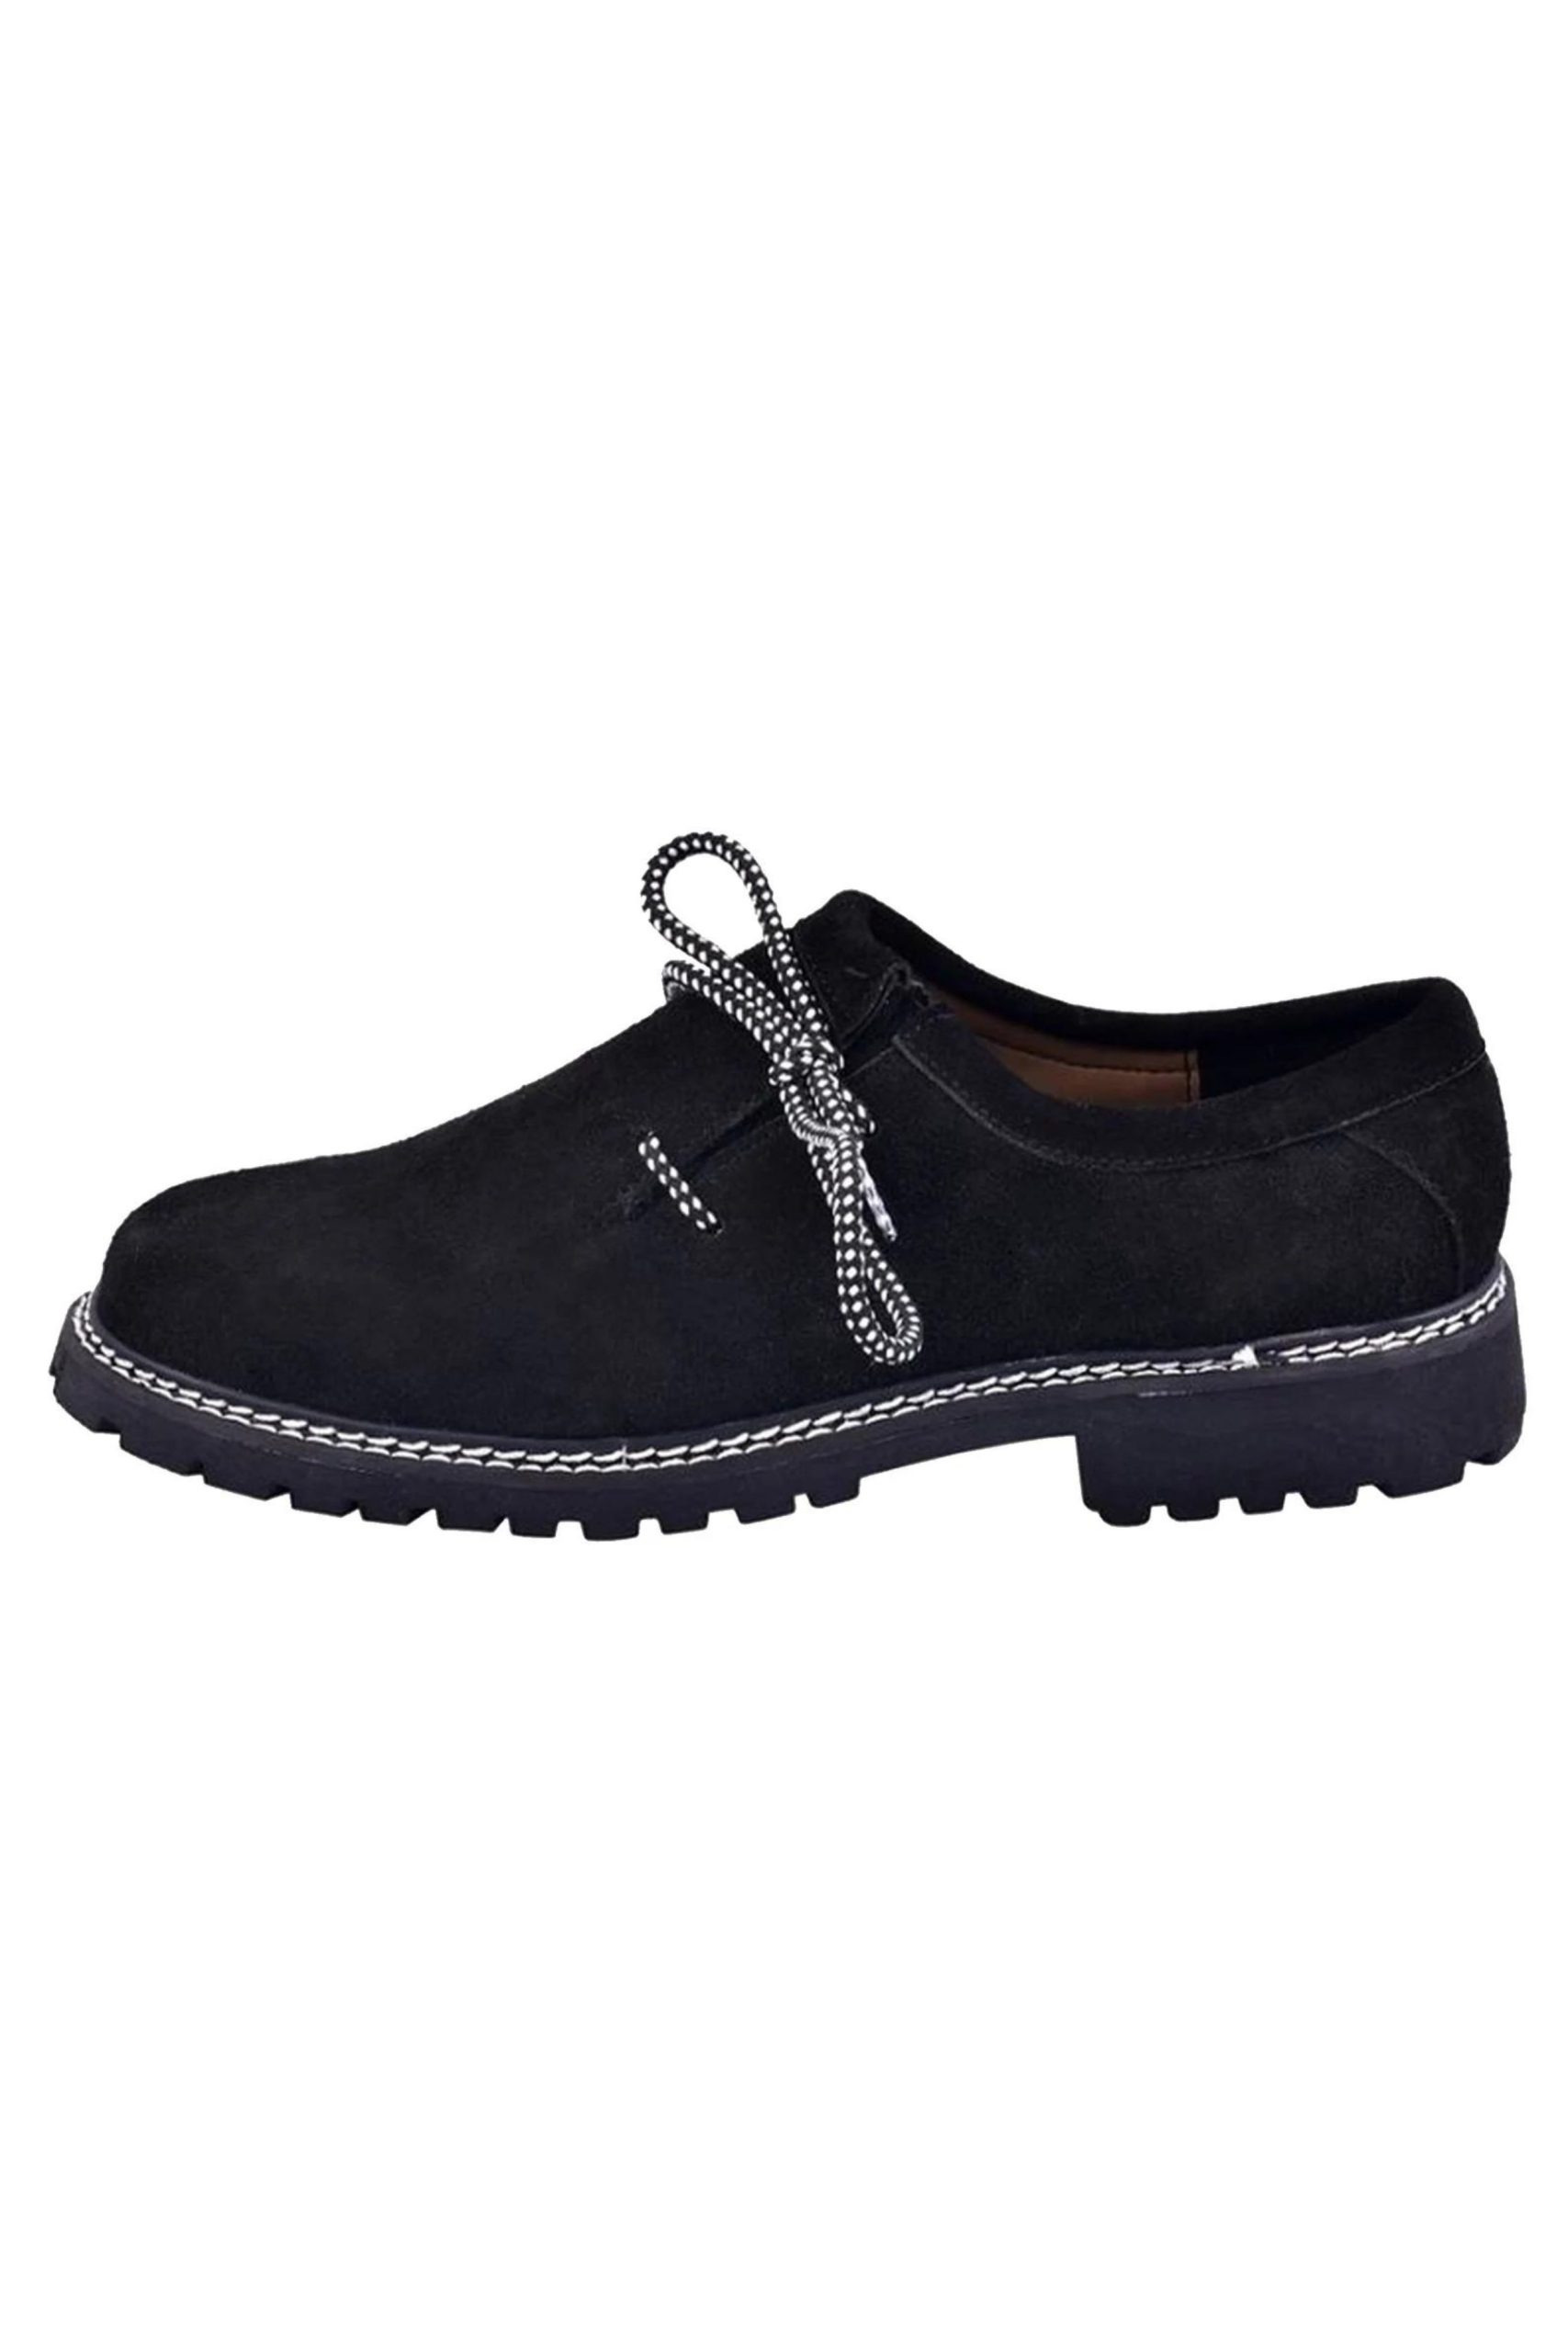 Niclas Lederhosen Shoe in black, displaying the side profile with intricate stitching and slip-resistant sole